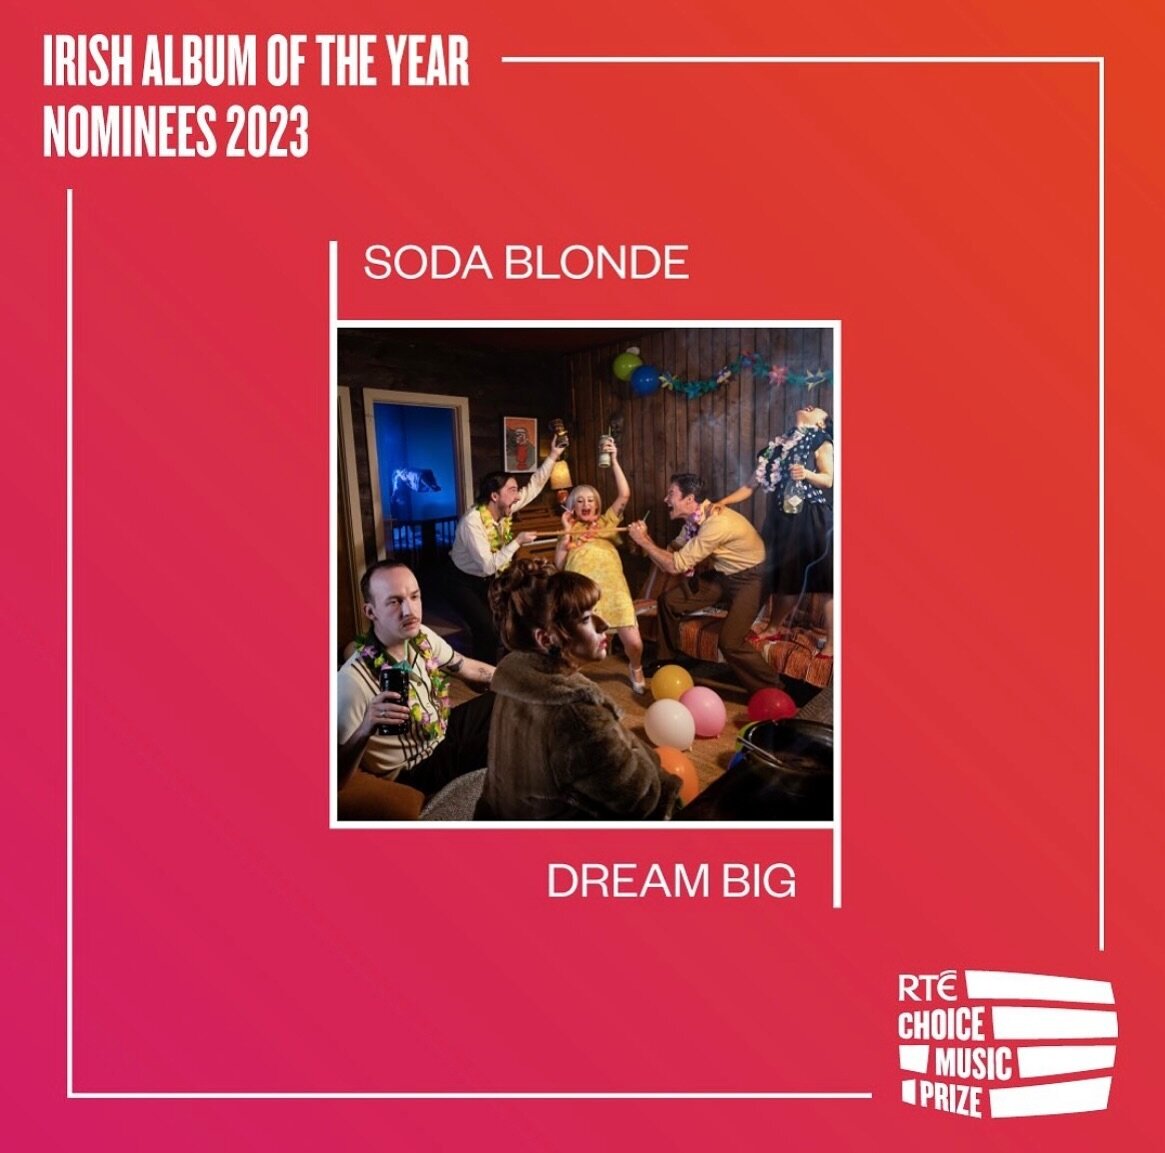 Dream Big has been nominated for the @choiceprize &lsquo;Album Of The Year&rsquo;. 2023 was a truly incredible year for Irish music and we&rsquo;re humbled to be included amongst such stellar records.